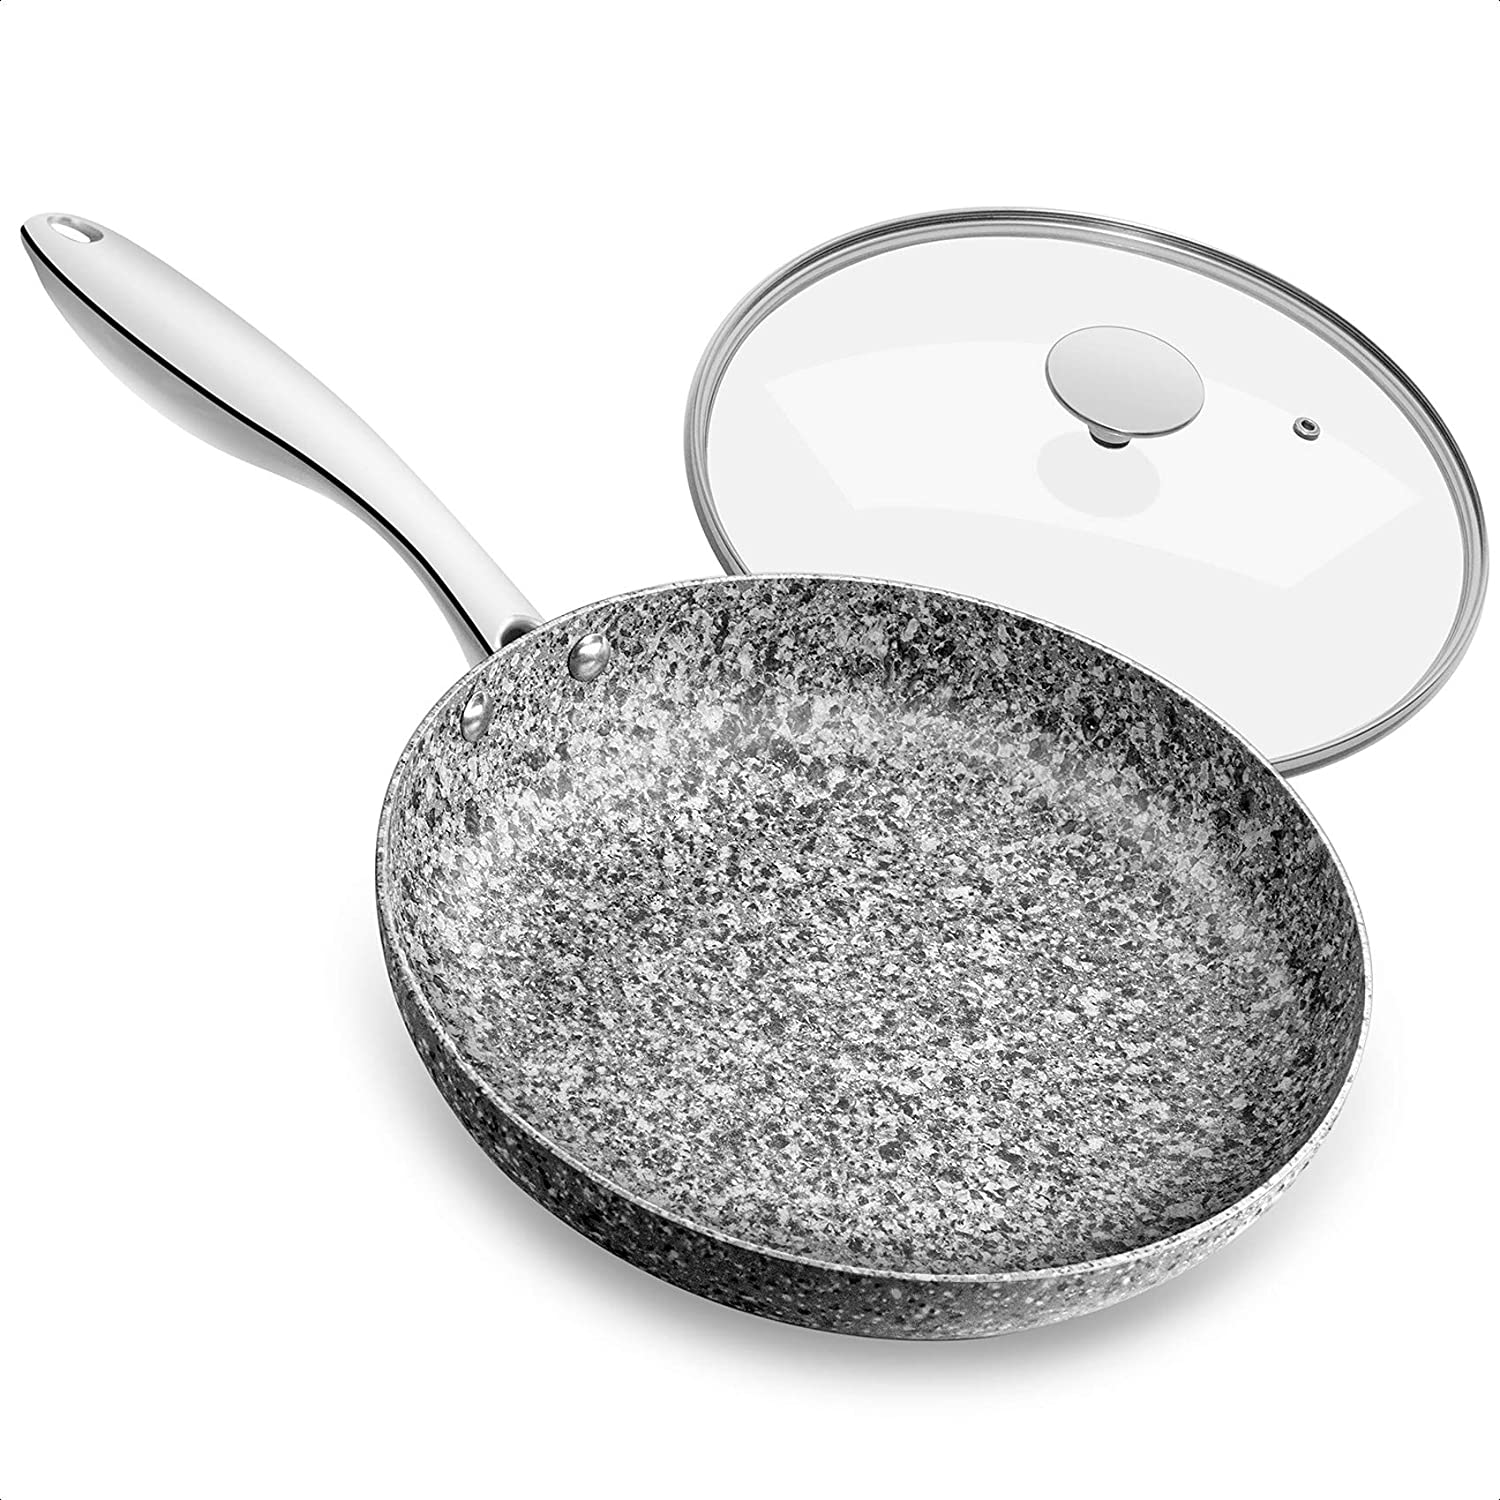 Stone Frying Pan with Lid, Nonstick 12 Inch Frying Pan with Non toxic Stone-Derived Coating, Granite Frying Pan, Nonstick Large Frying Pans with Lid, Induction Compatible - 12 Inch - image 1 of 7